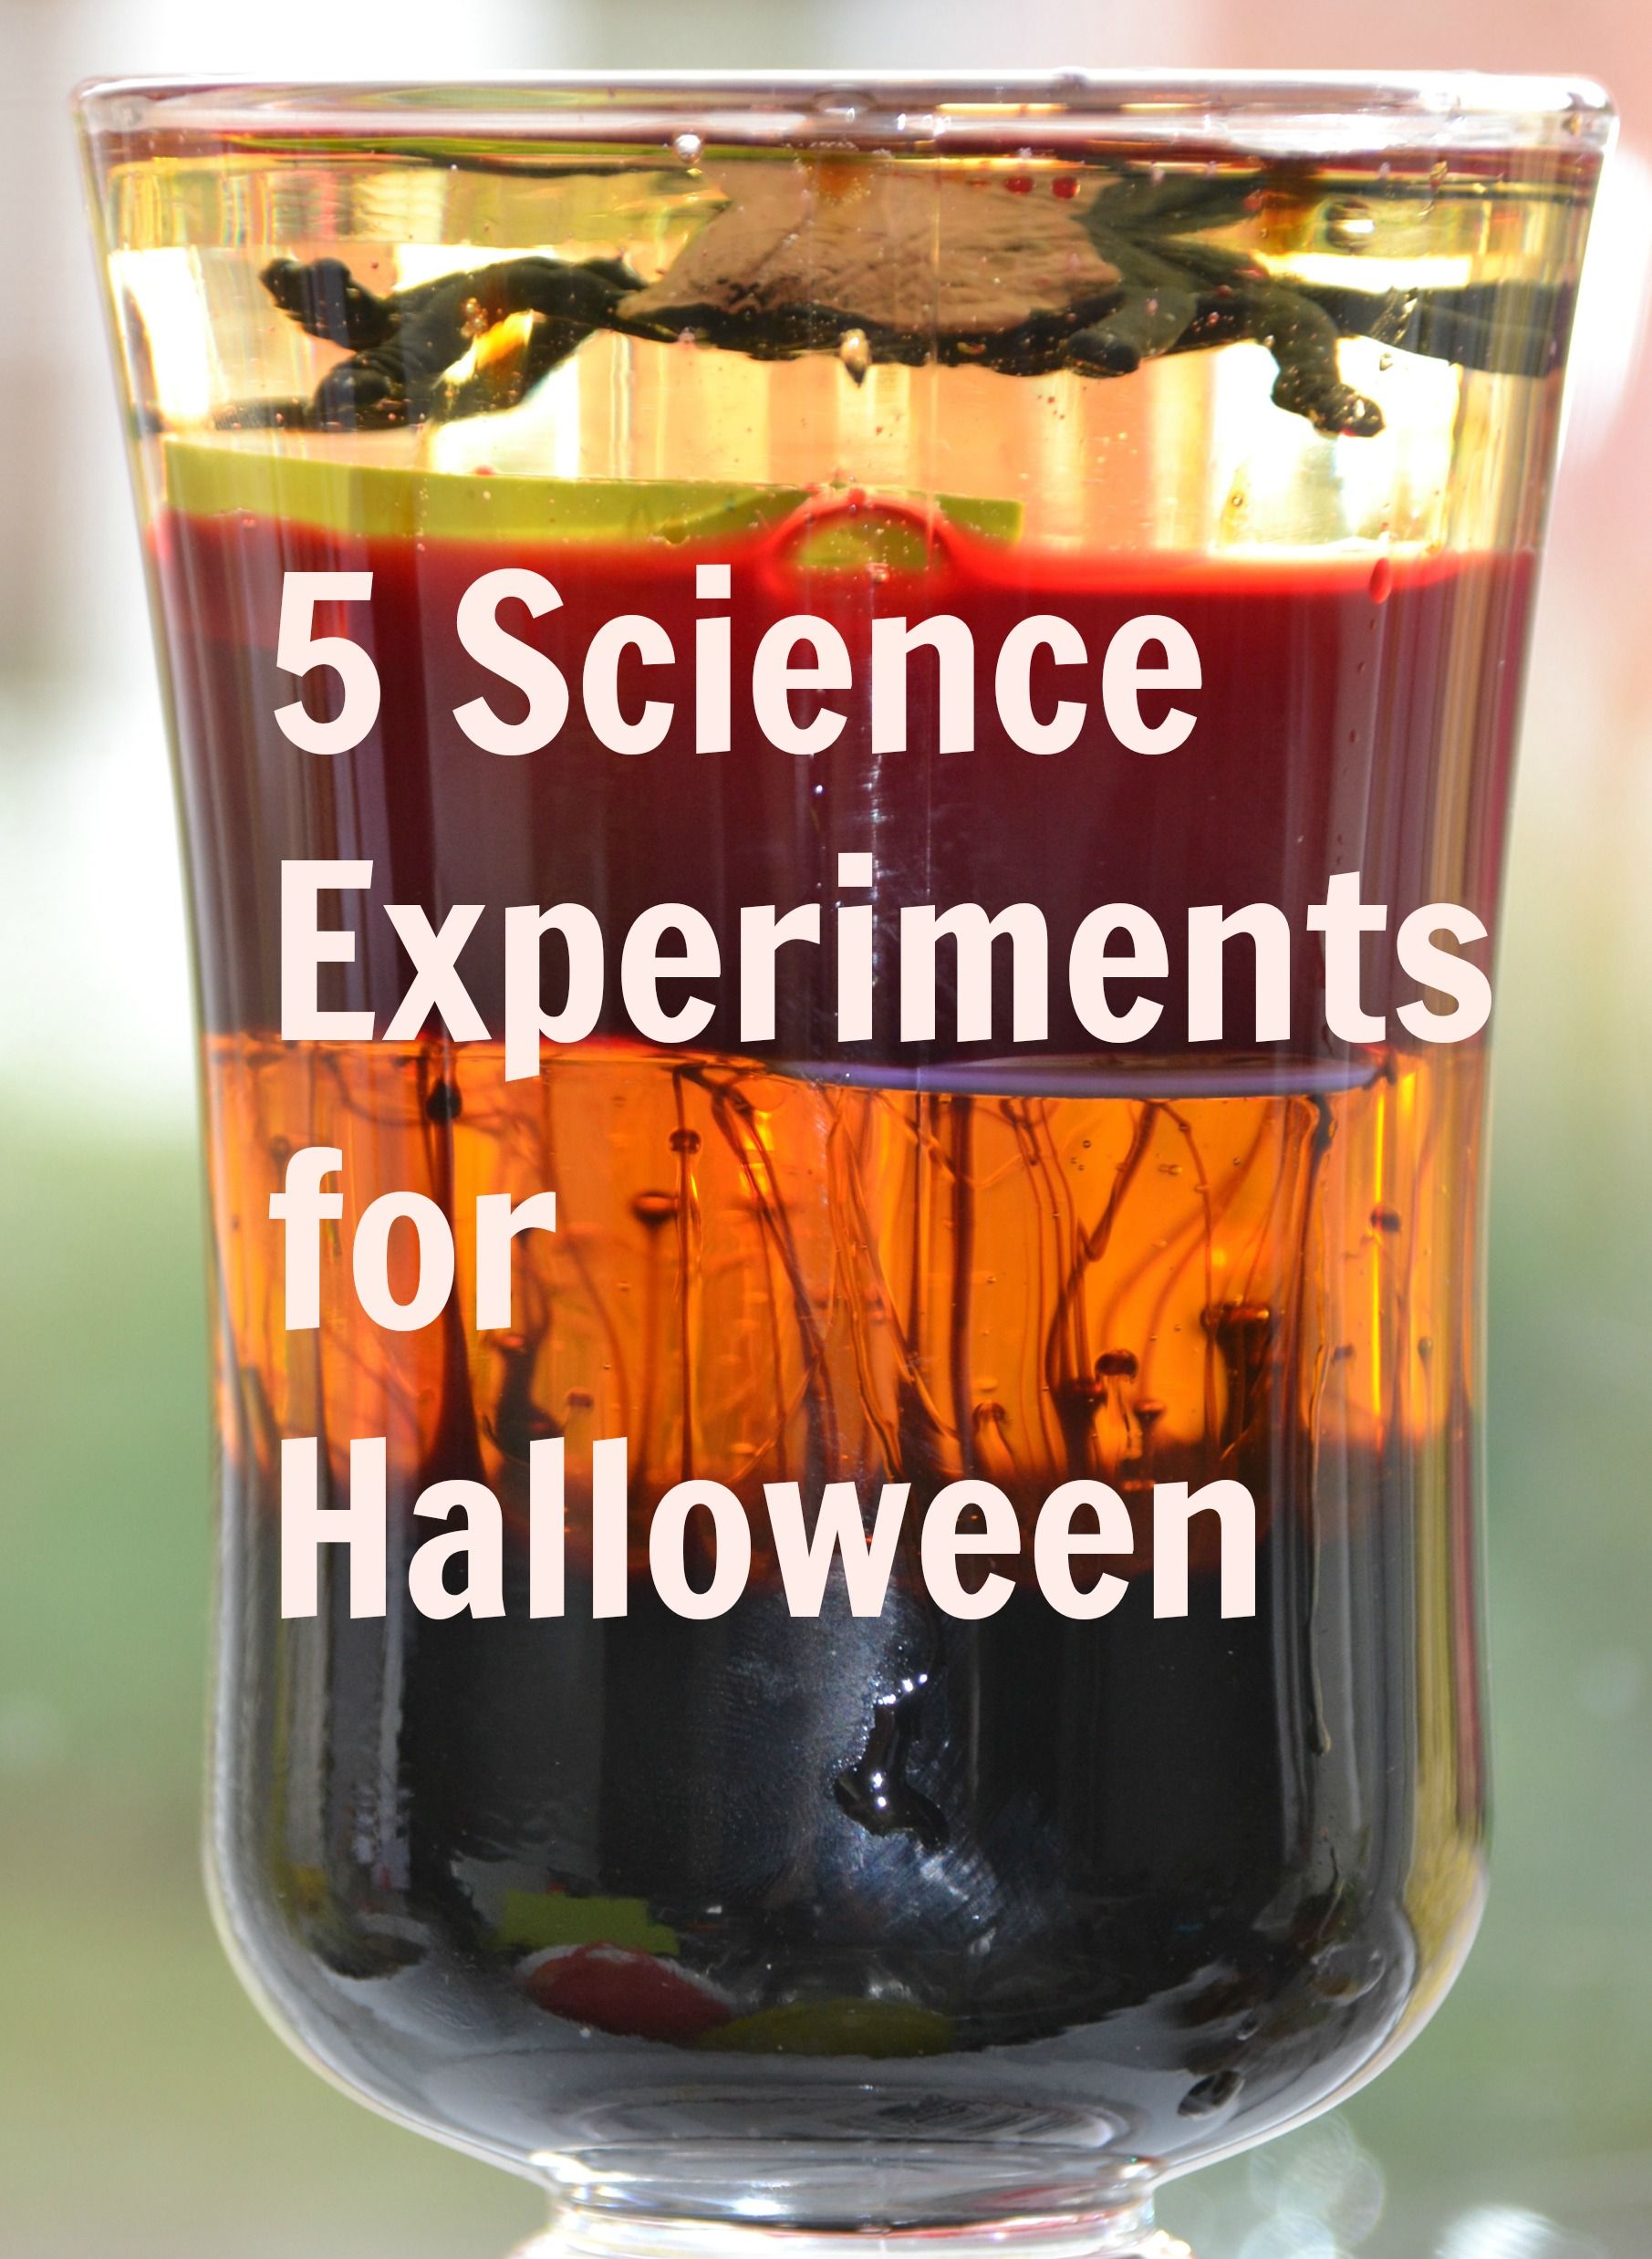 5 Science Experiments for Halloween